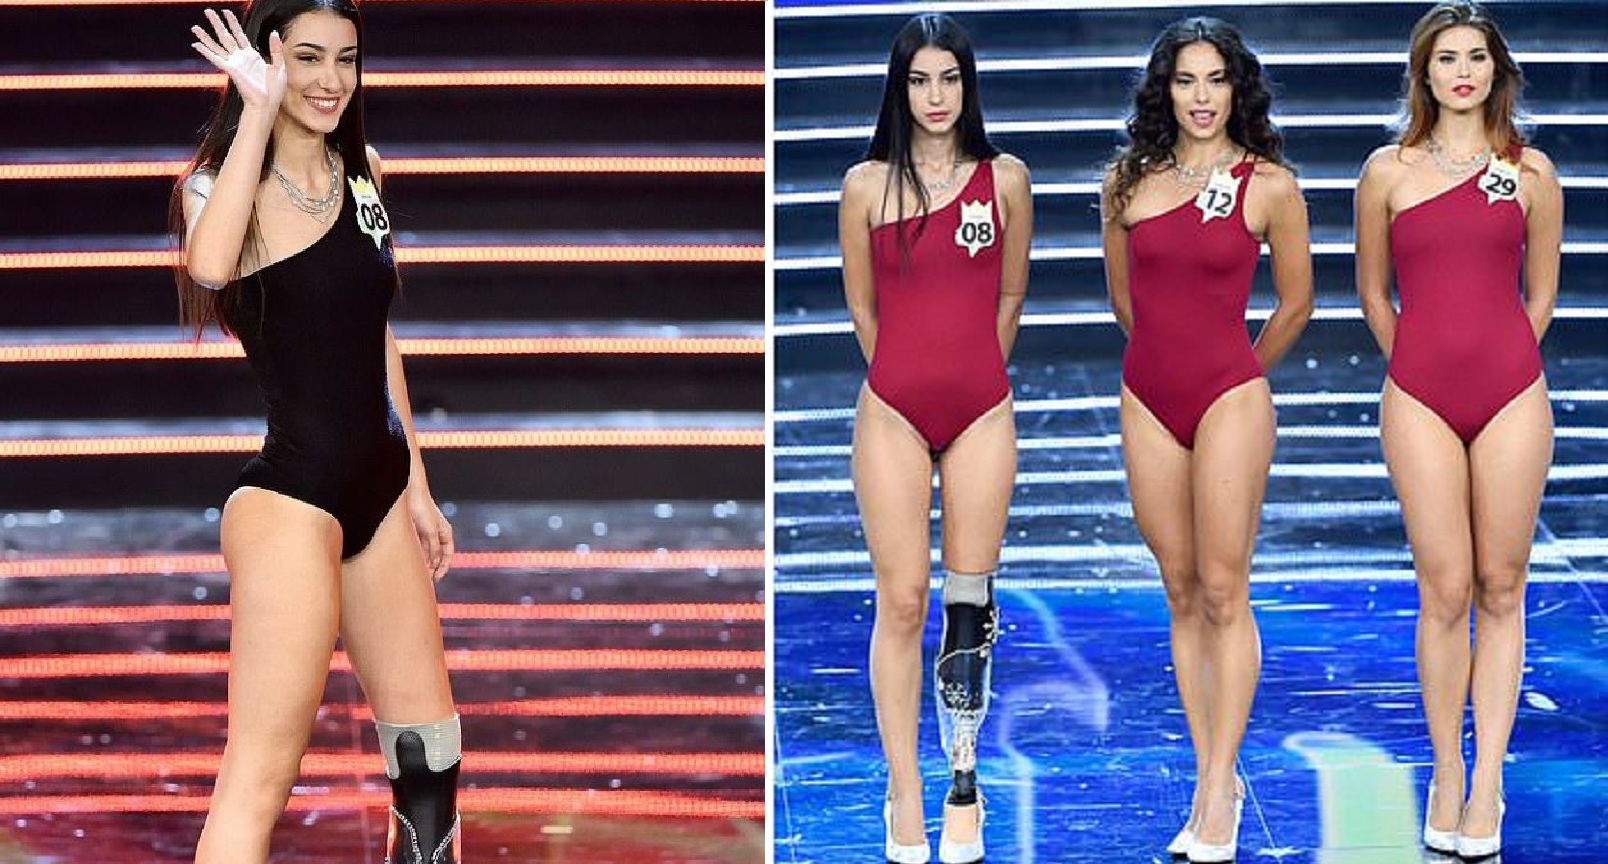 This Beauty with a Prosthetic Leg Has Made it to the Final’s of Miss Italy!